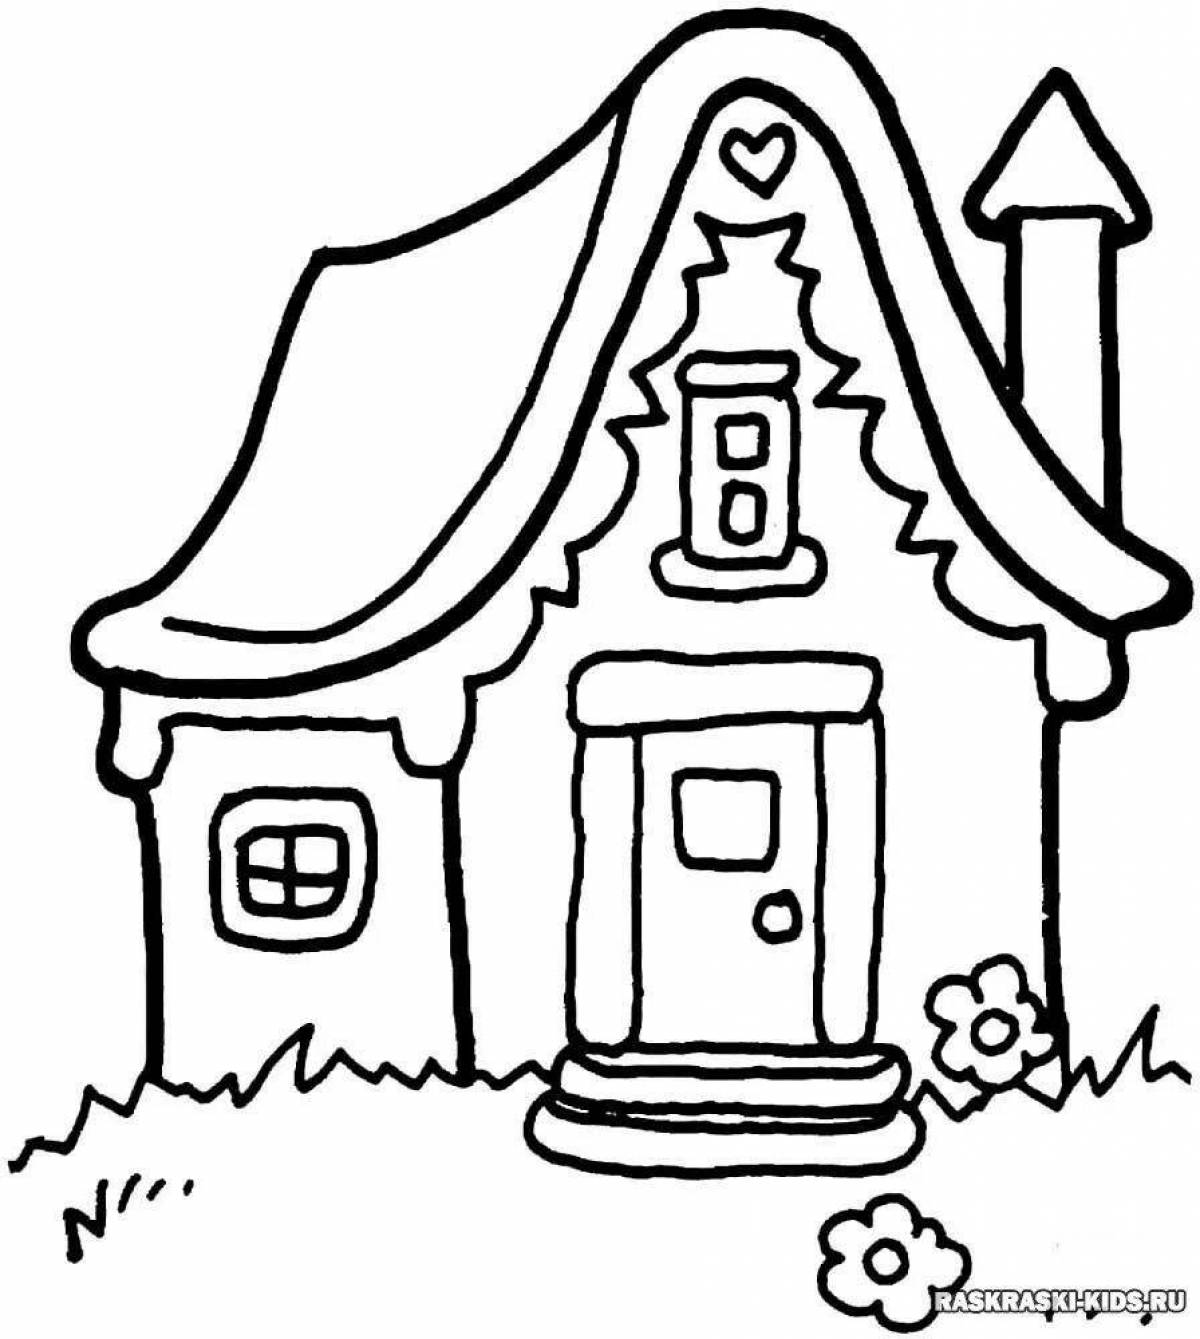 Fancy drawing of a house